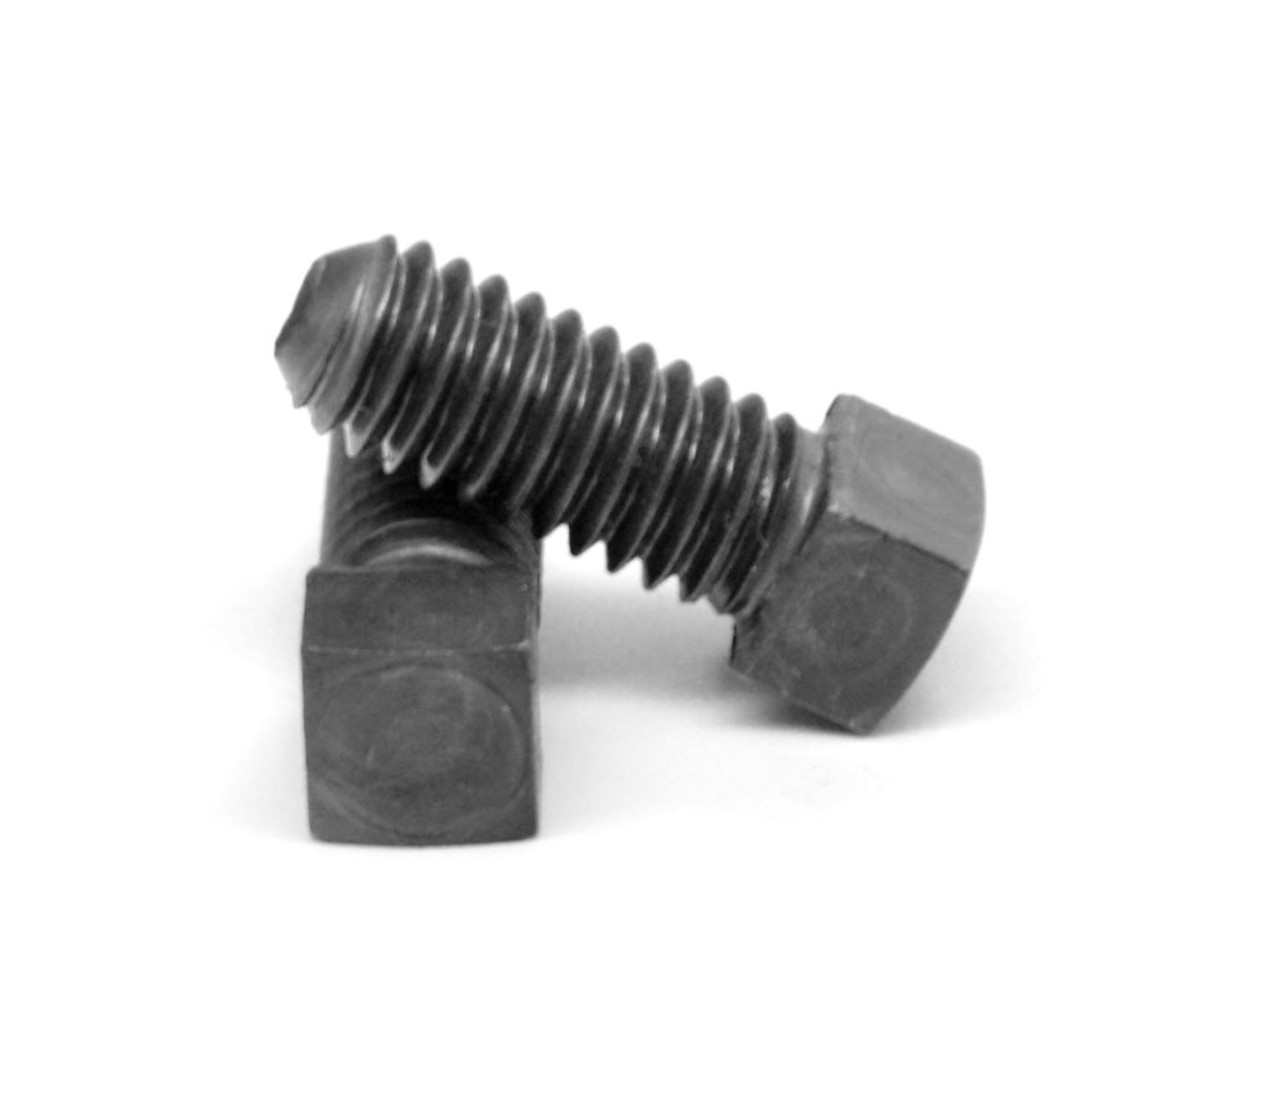 1 1/4"-7 x 3 1/2" (FT) Coarse Thread Square Head Set Screw Cup Point Low Carbon Steel Case Hardened Plain Finish